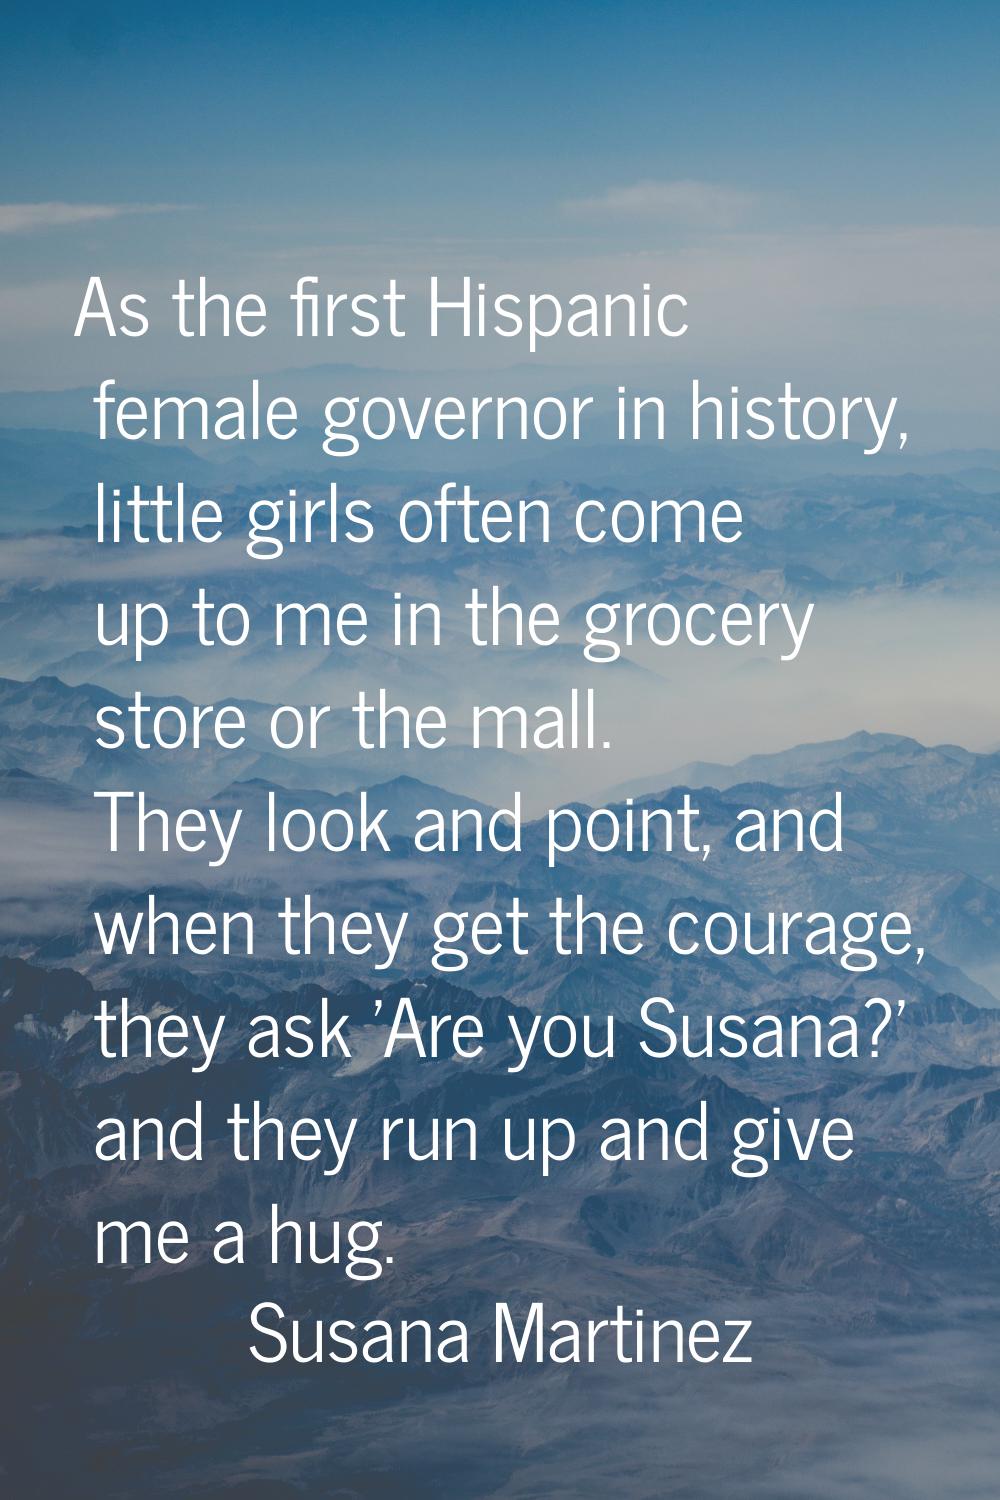 As the first Hispanic female governor in history, little girls often come up to me in the grocery s